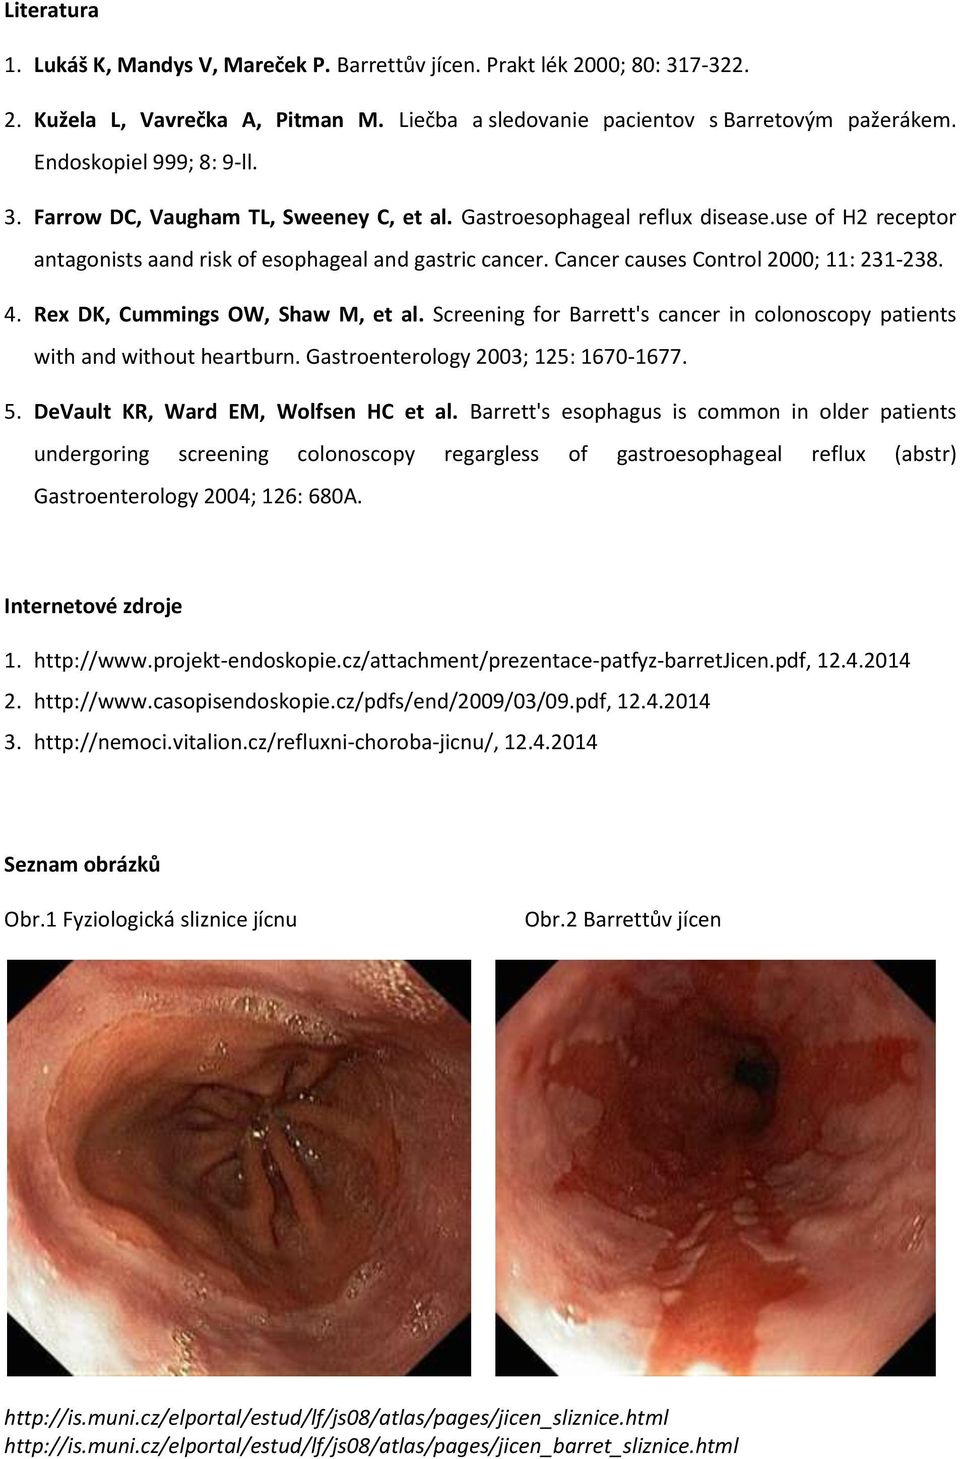 Cancer causes Control 2000; 11: 231-238. 4. Rex DK, Cummings OW, Shaw M, et al. Screening for Barrett's cancer in colonoscopy patients with and without heartburn.